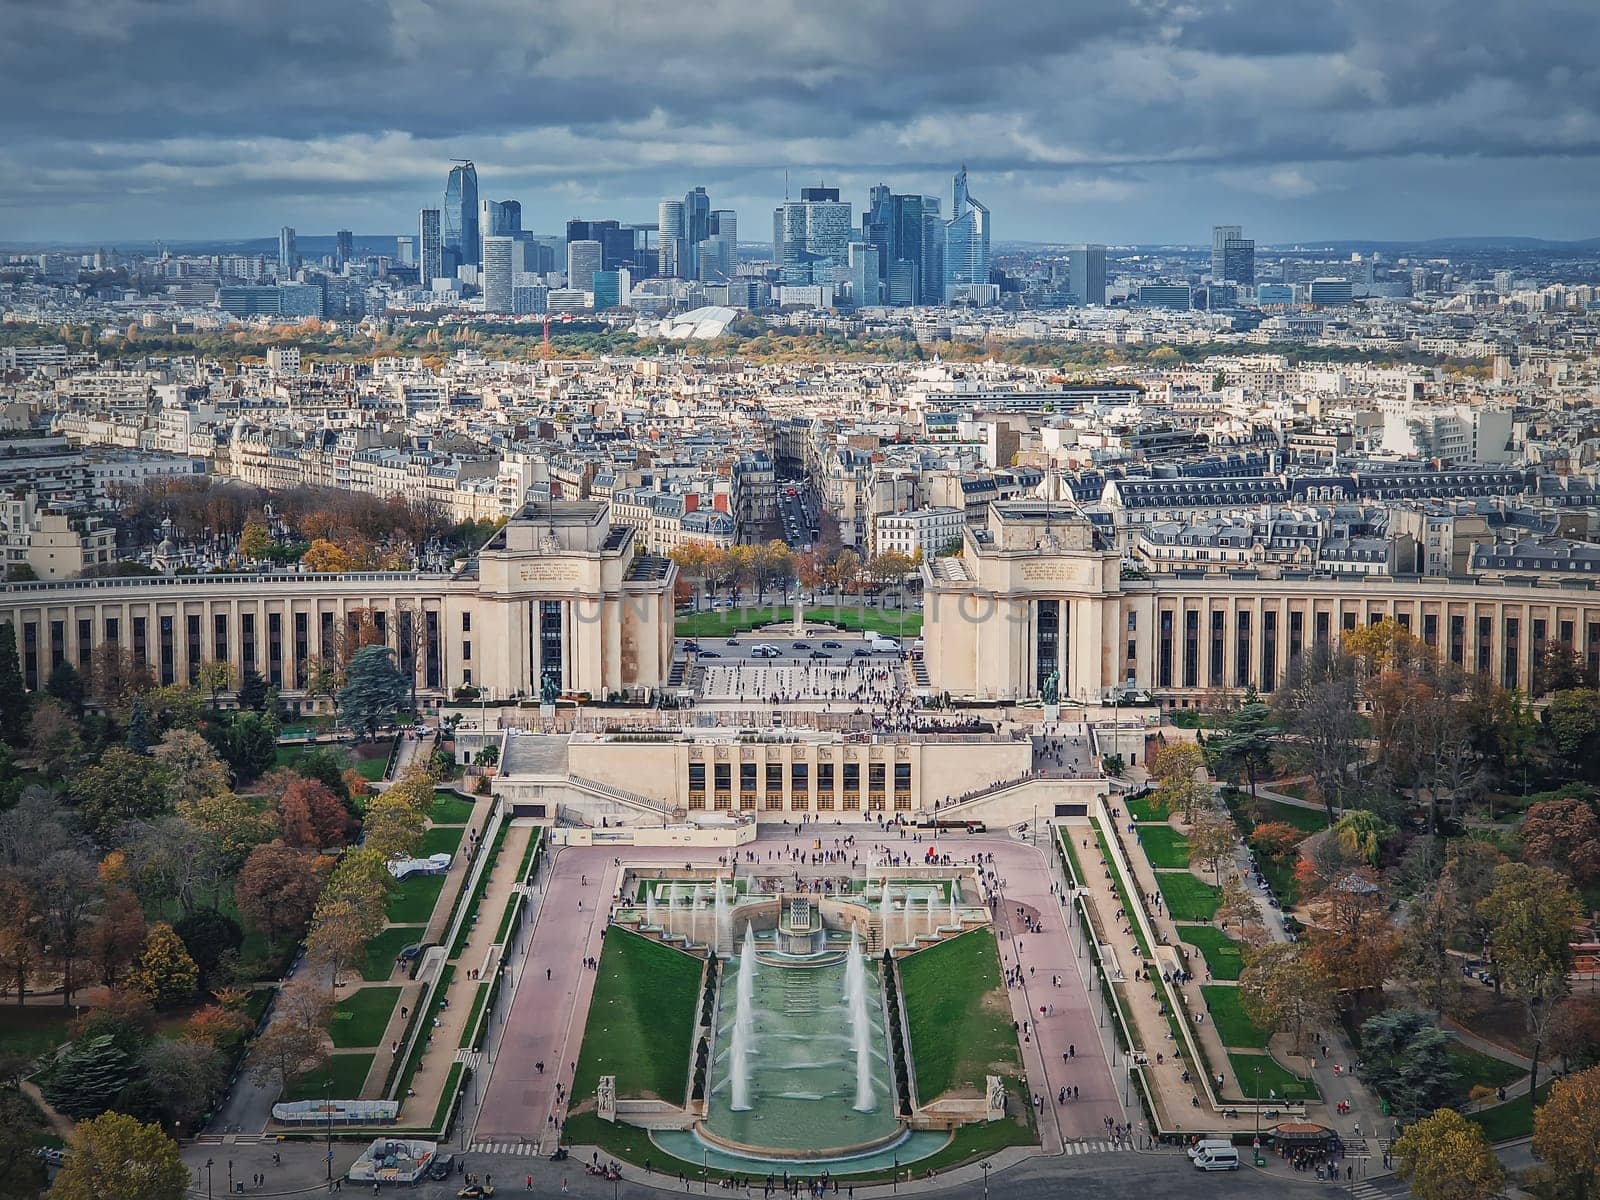 Sightseeing aerial view of the Trocadero area and La Defense metropolitan district seen at the horizon in Paris, France. Beautiful autumn season colors by psychoshadow